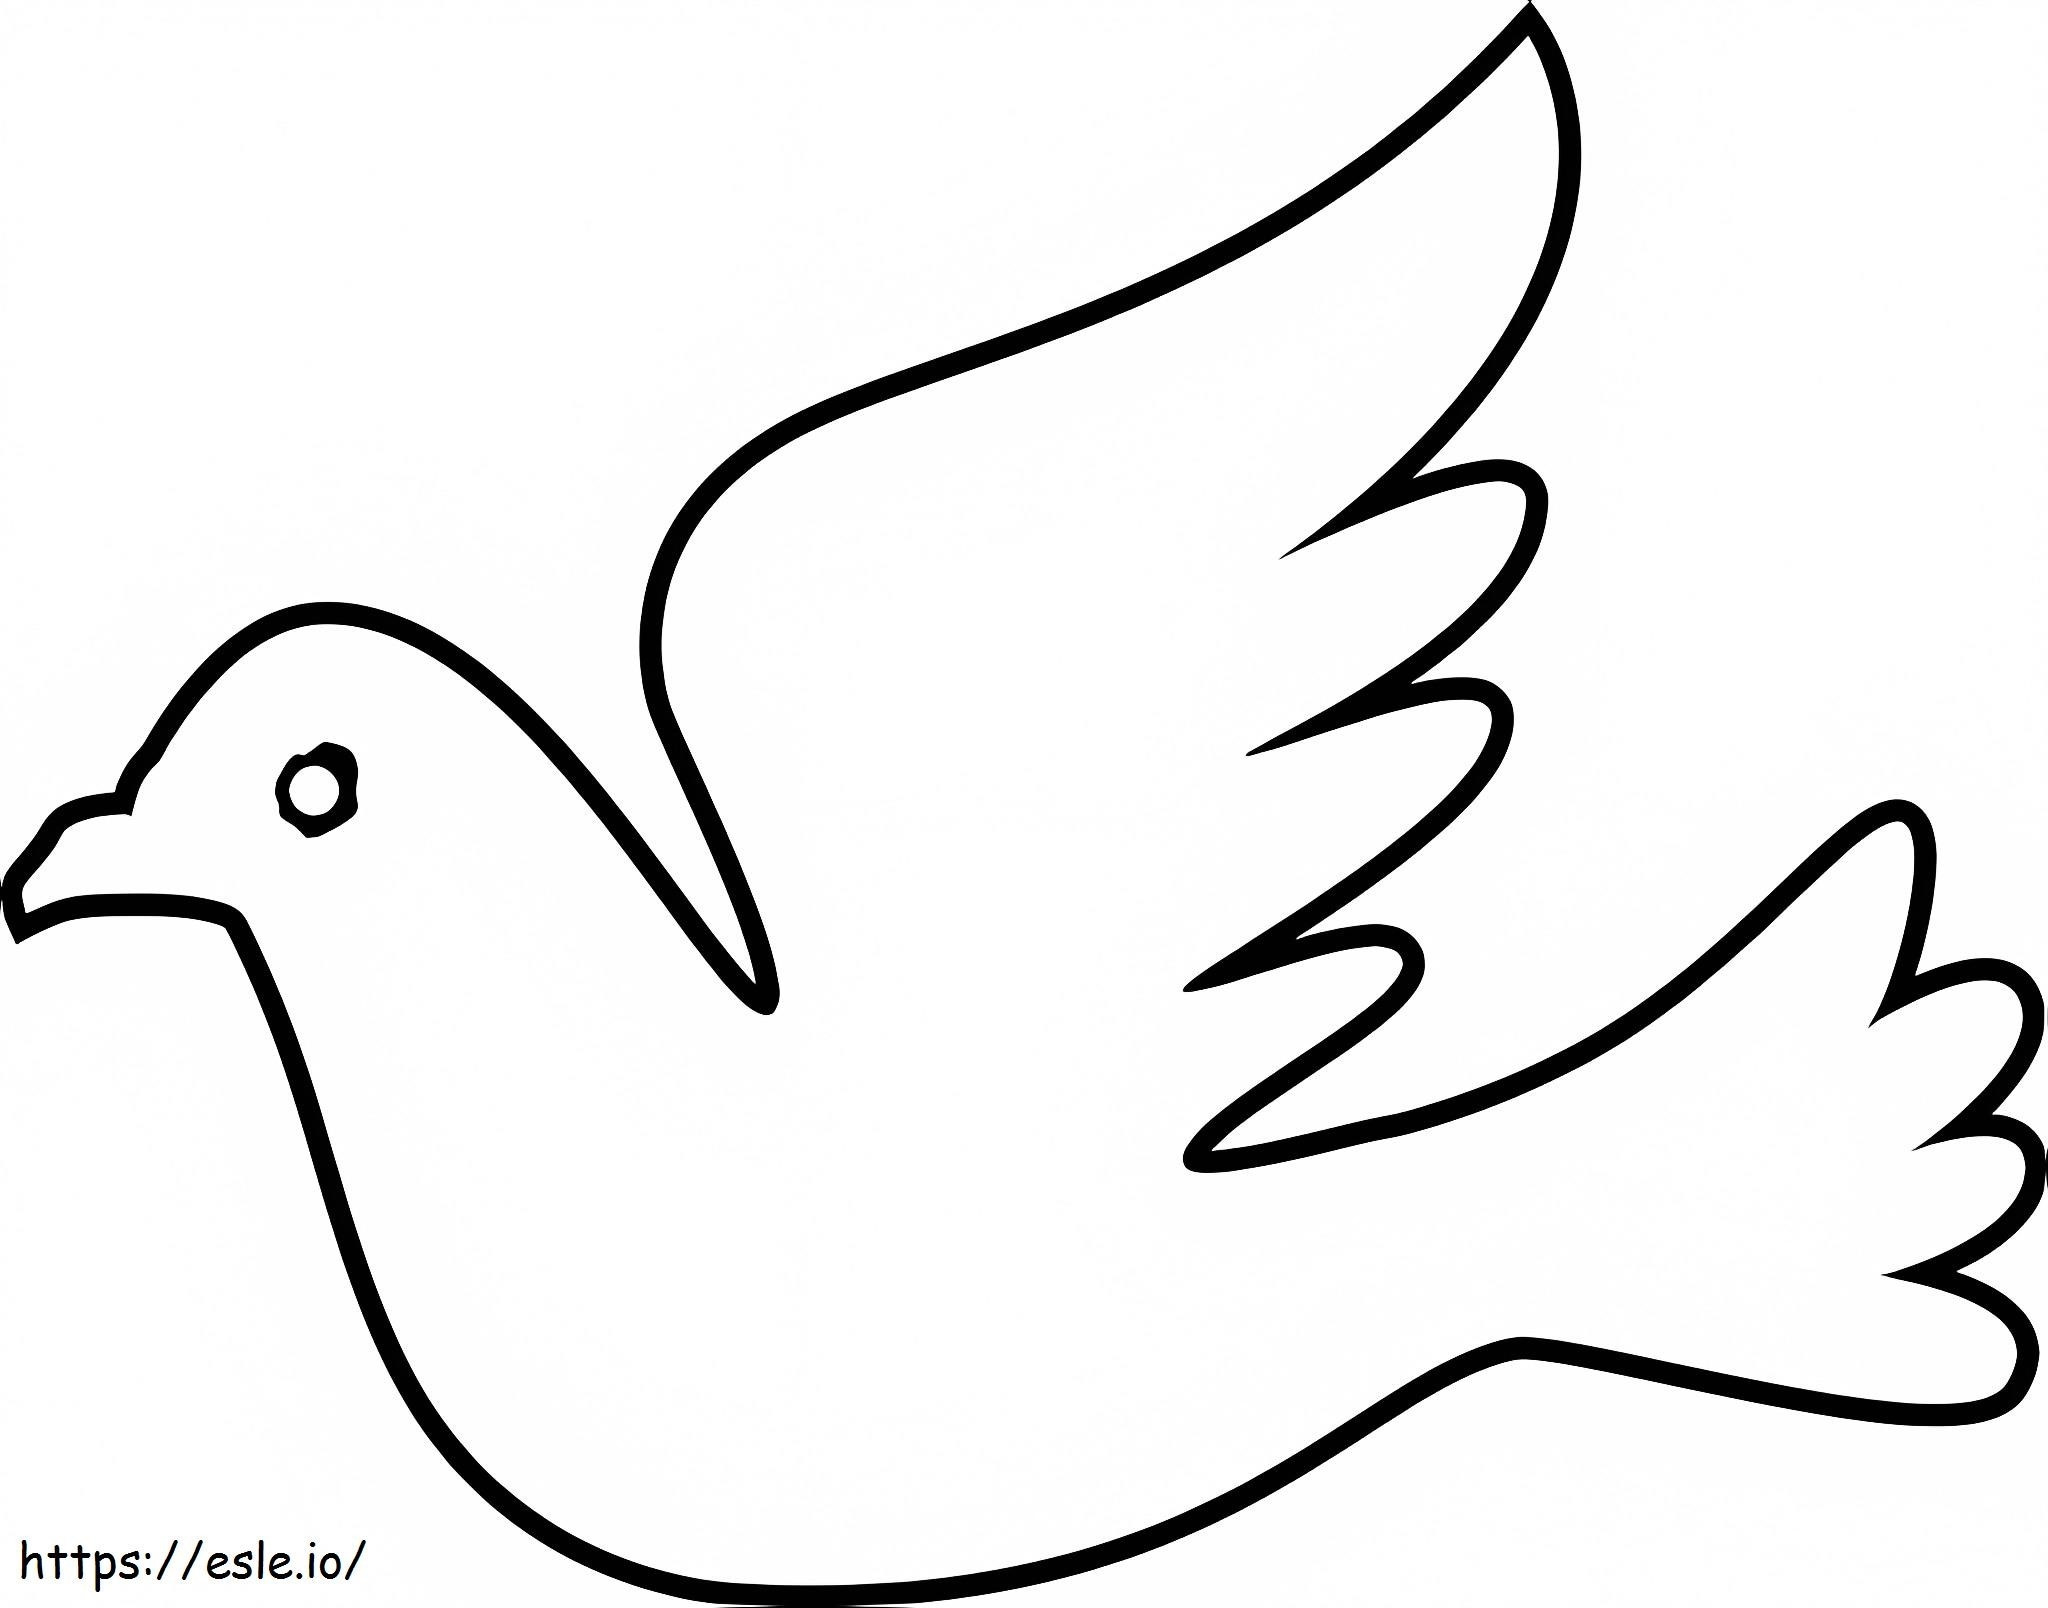 Simple Pigeon coloring page